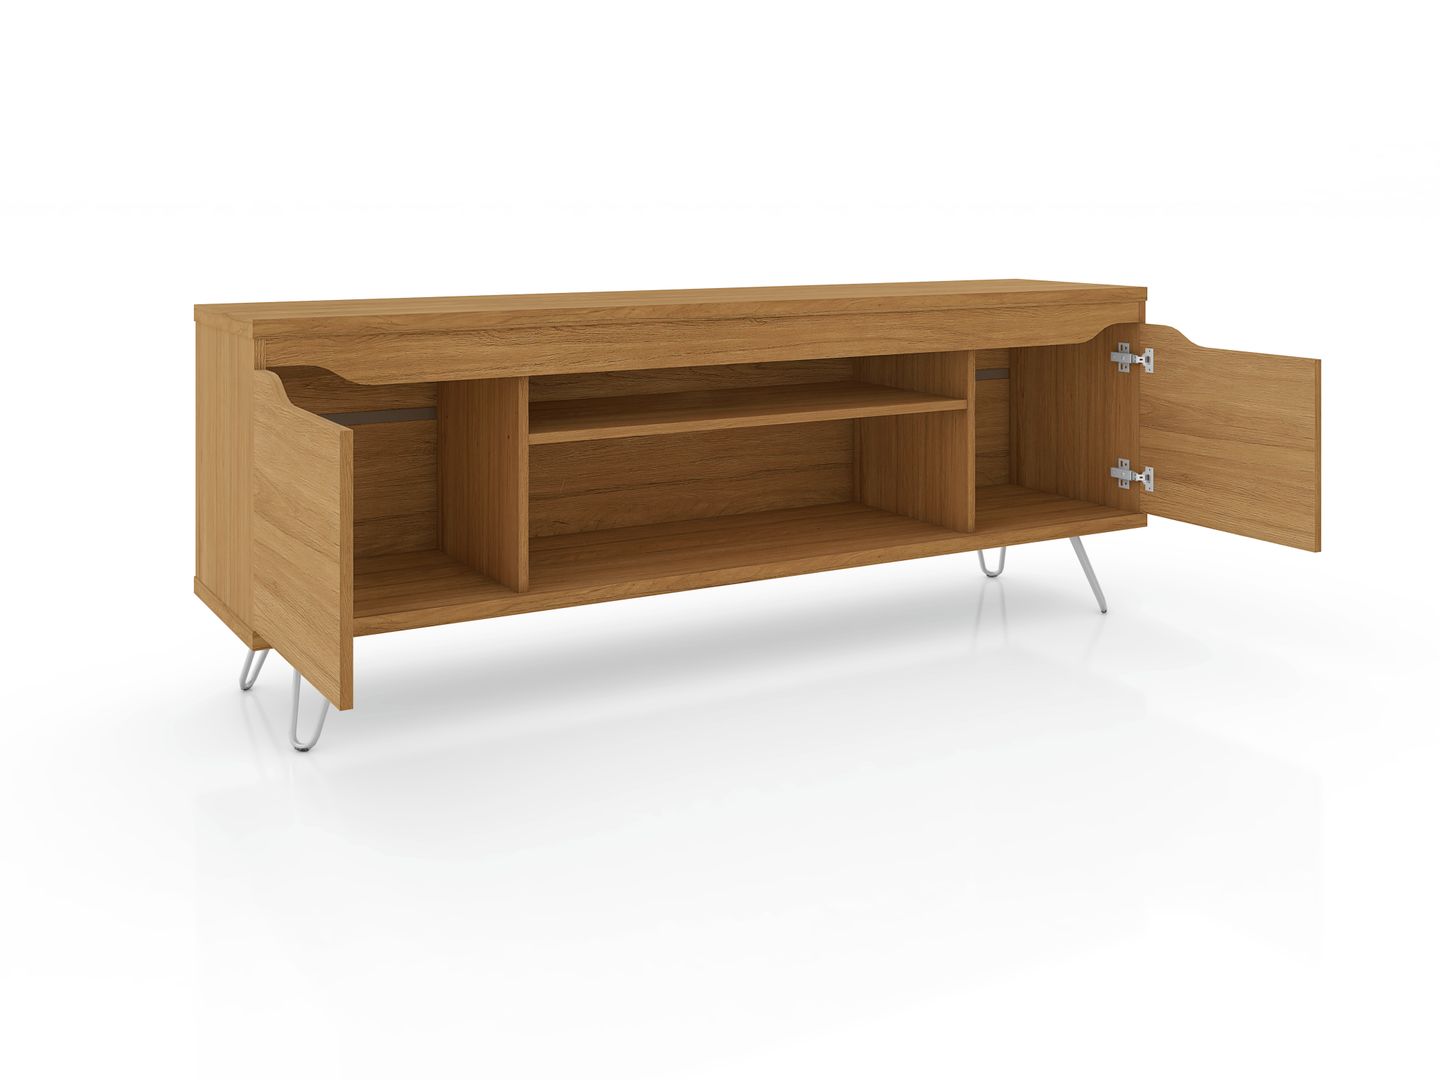 Manhattan Comfort Baxter 62.99 Mid-Century Modern TV Stand and Liberty Panel with Media and Display Shelves in Cinnamon